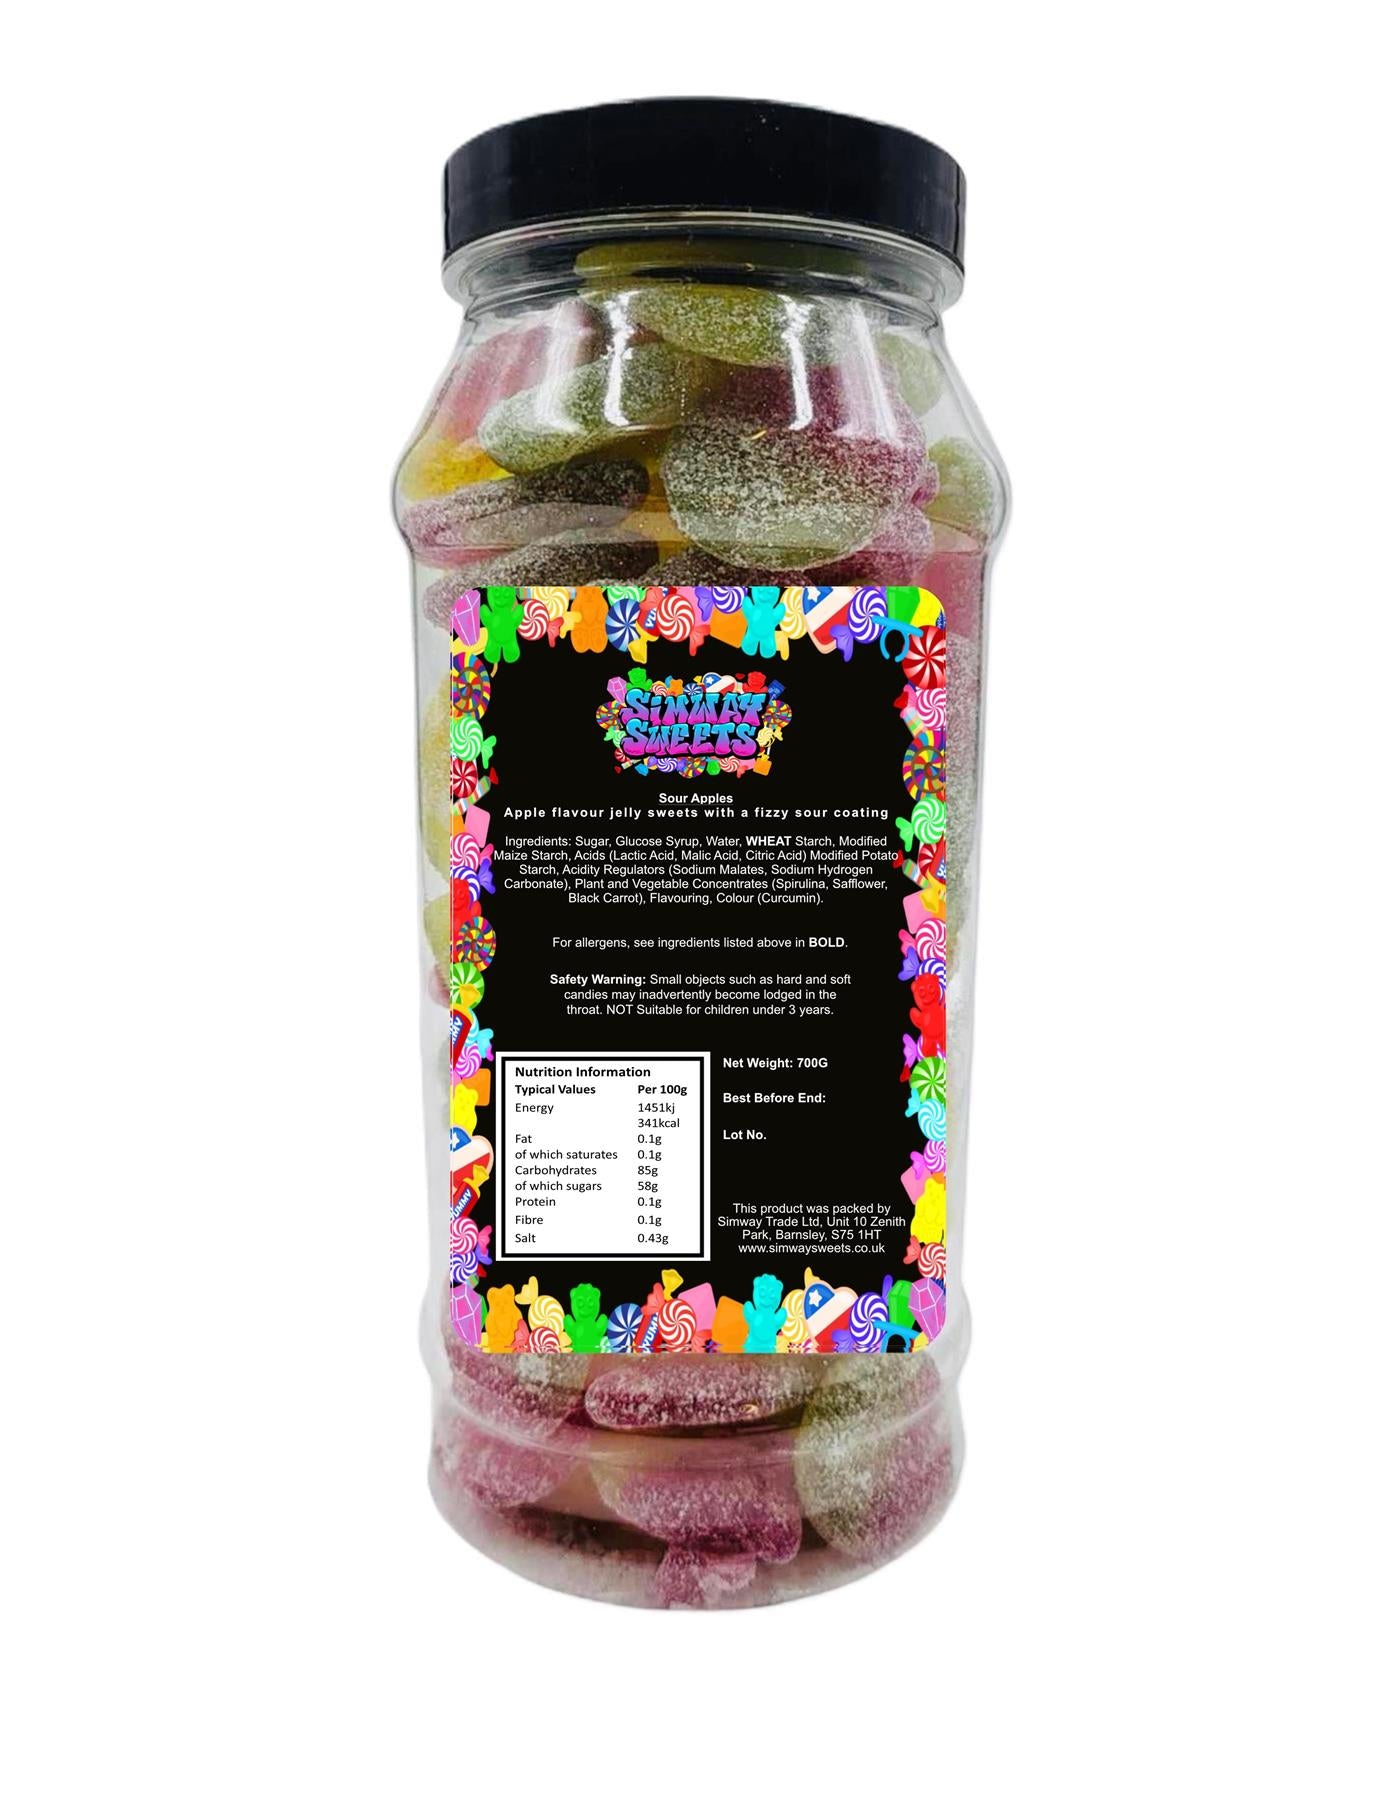 Fizzy Sour Apples Sweets Gummy Jelly Retro Sweets Gift Jar - 700g